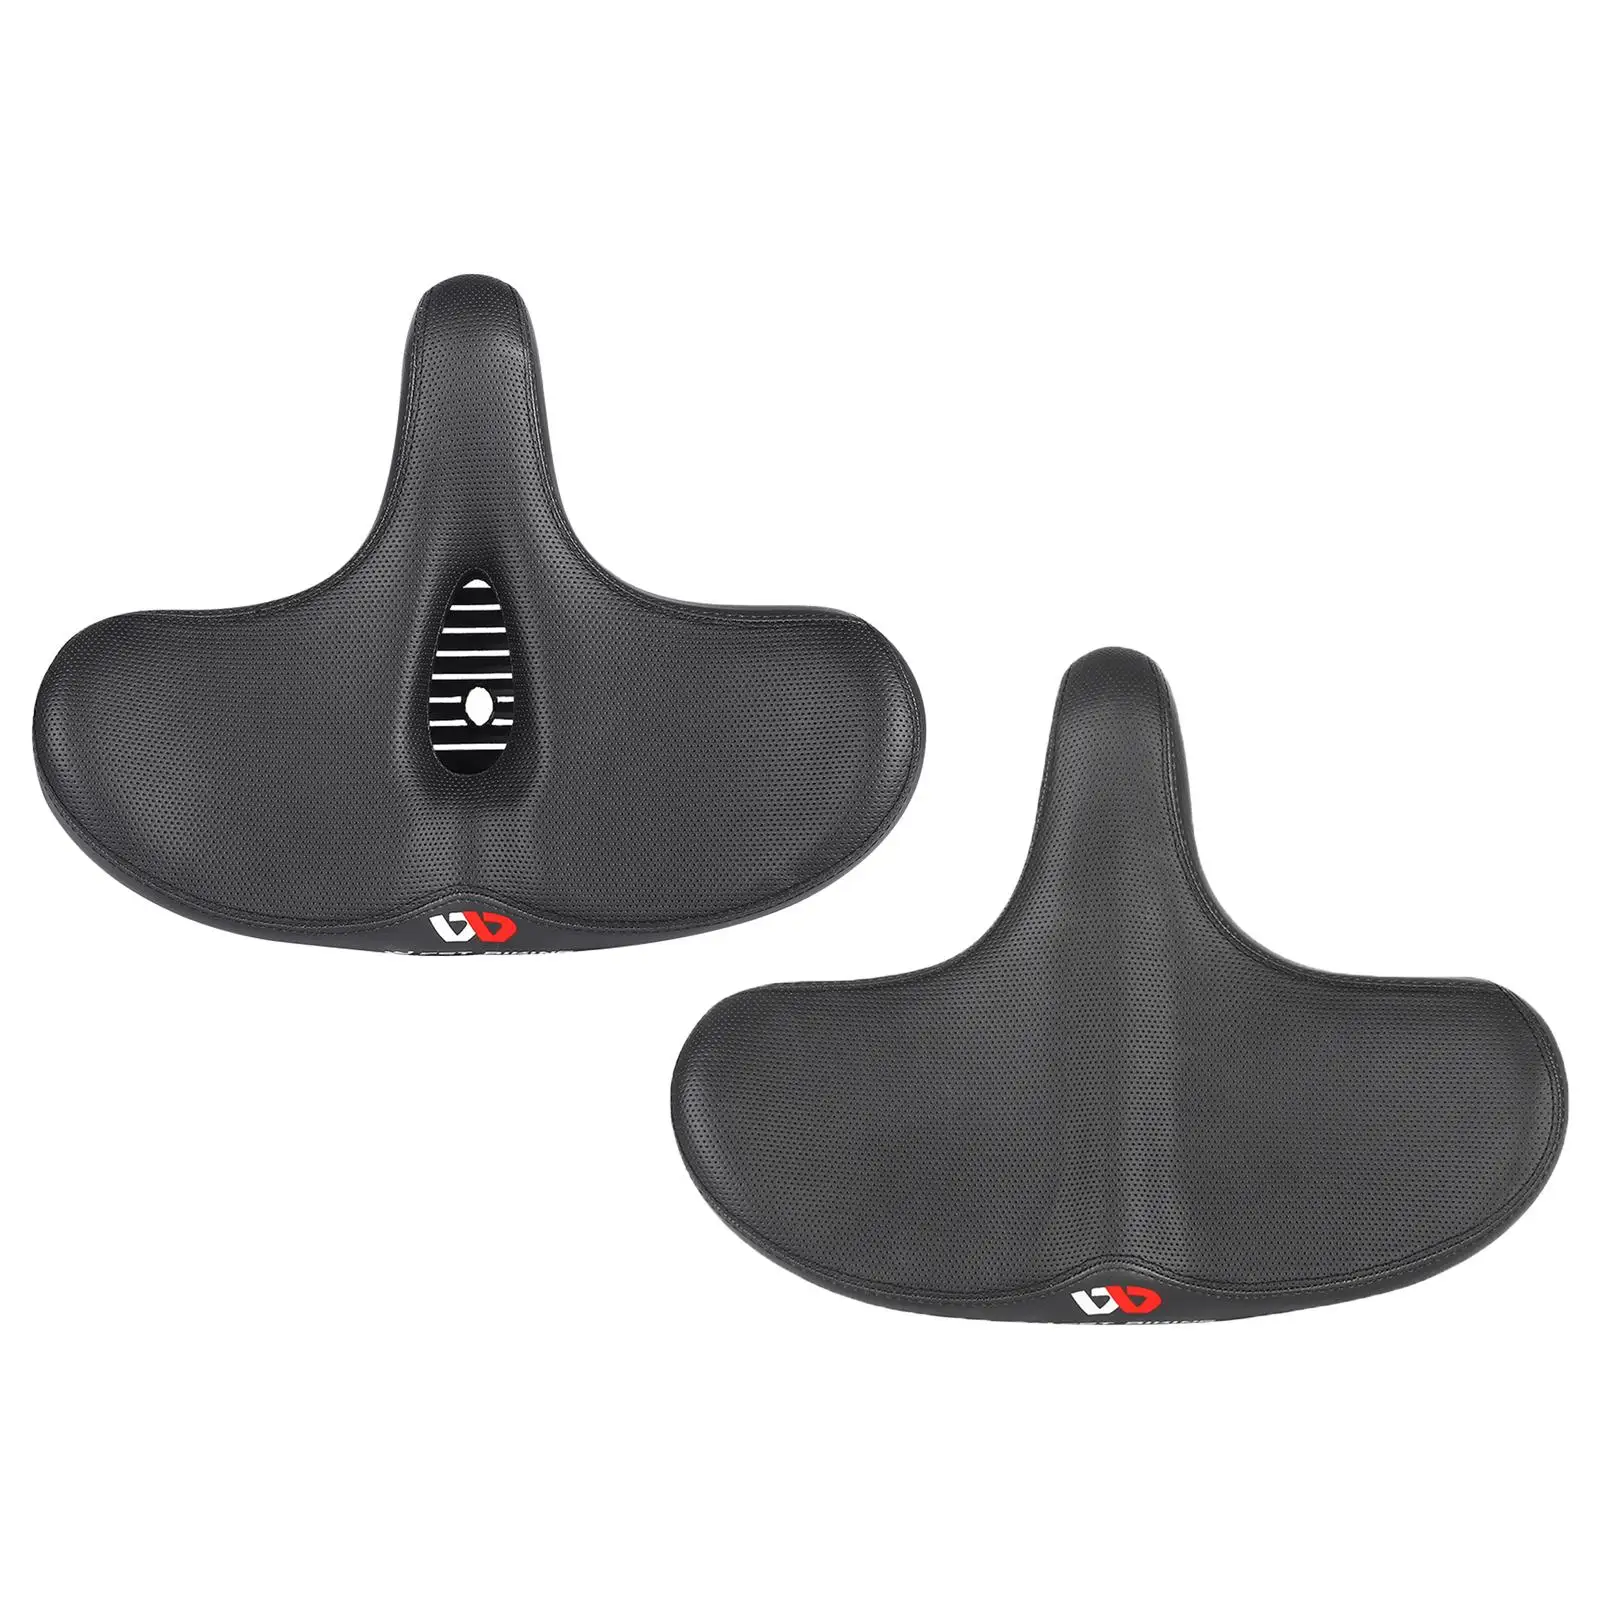 Comfort Bicycle Seat Bike Saddle for Men & Women Sport Cycling Accessories